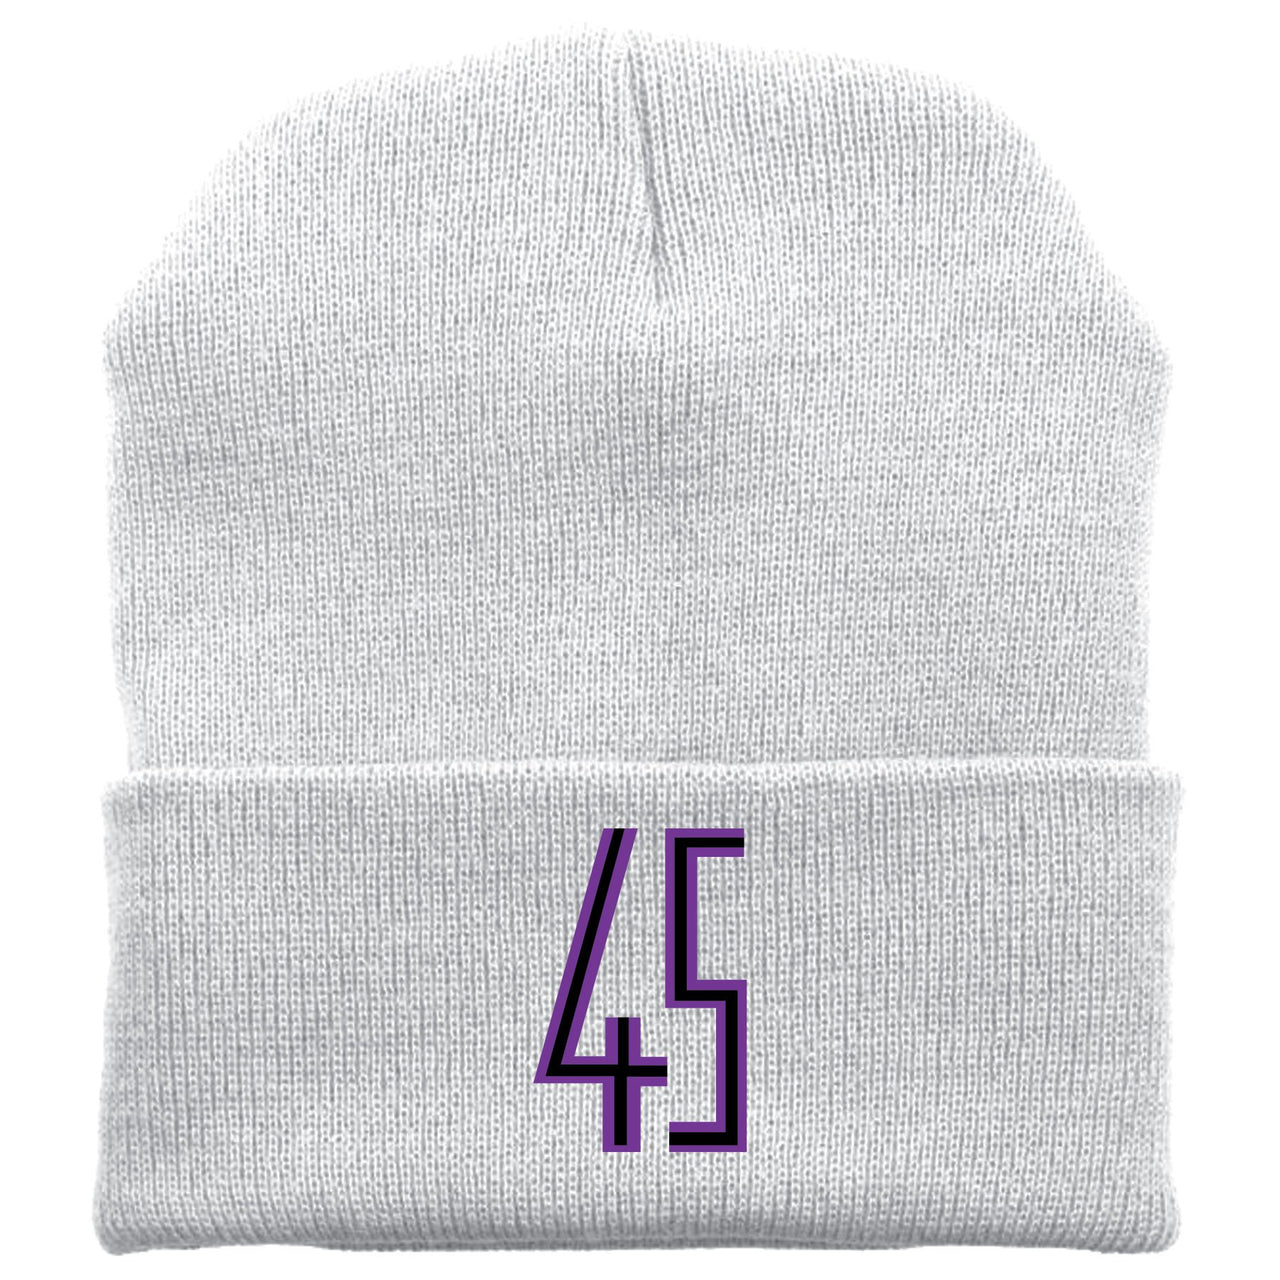 Embroidered on the front of the Jordan 11 Concord 45s sneaker matching winter beanie is the 45 logo in purple and black